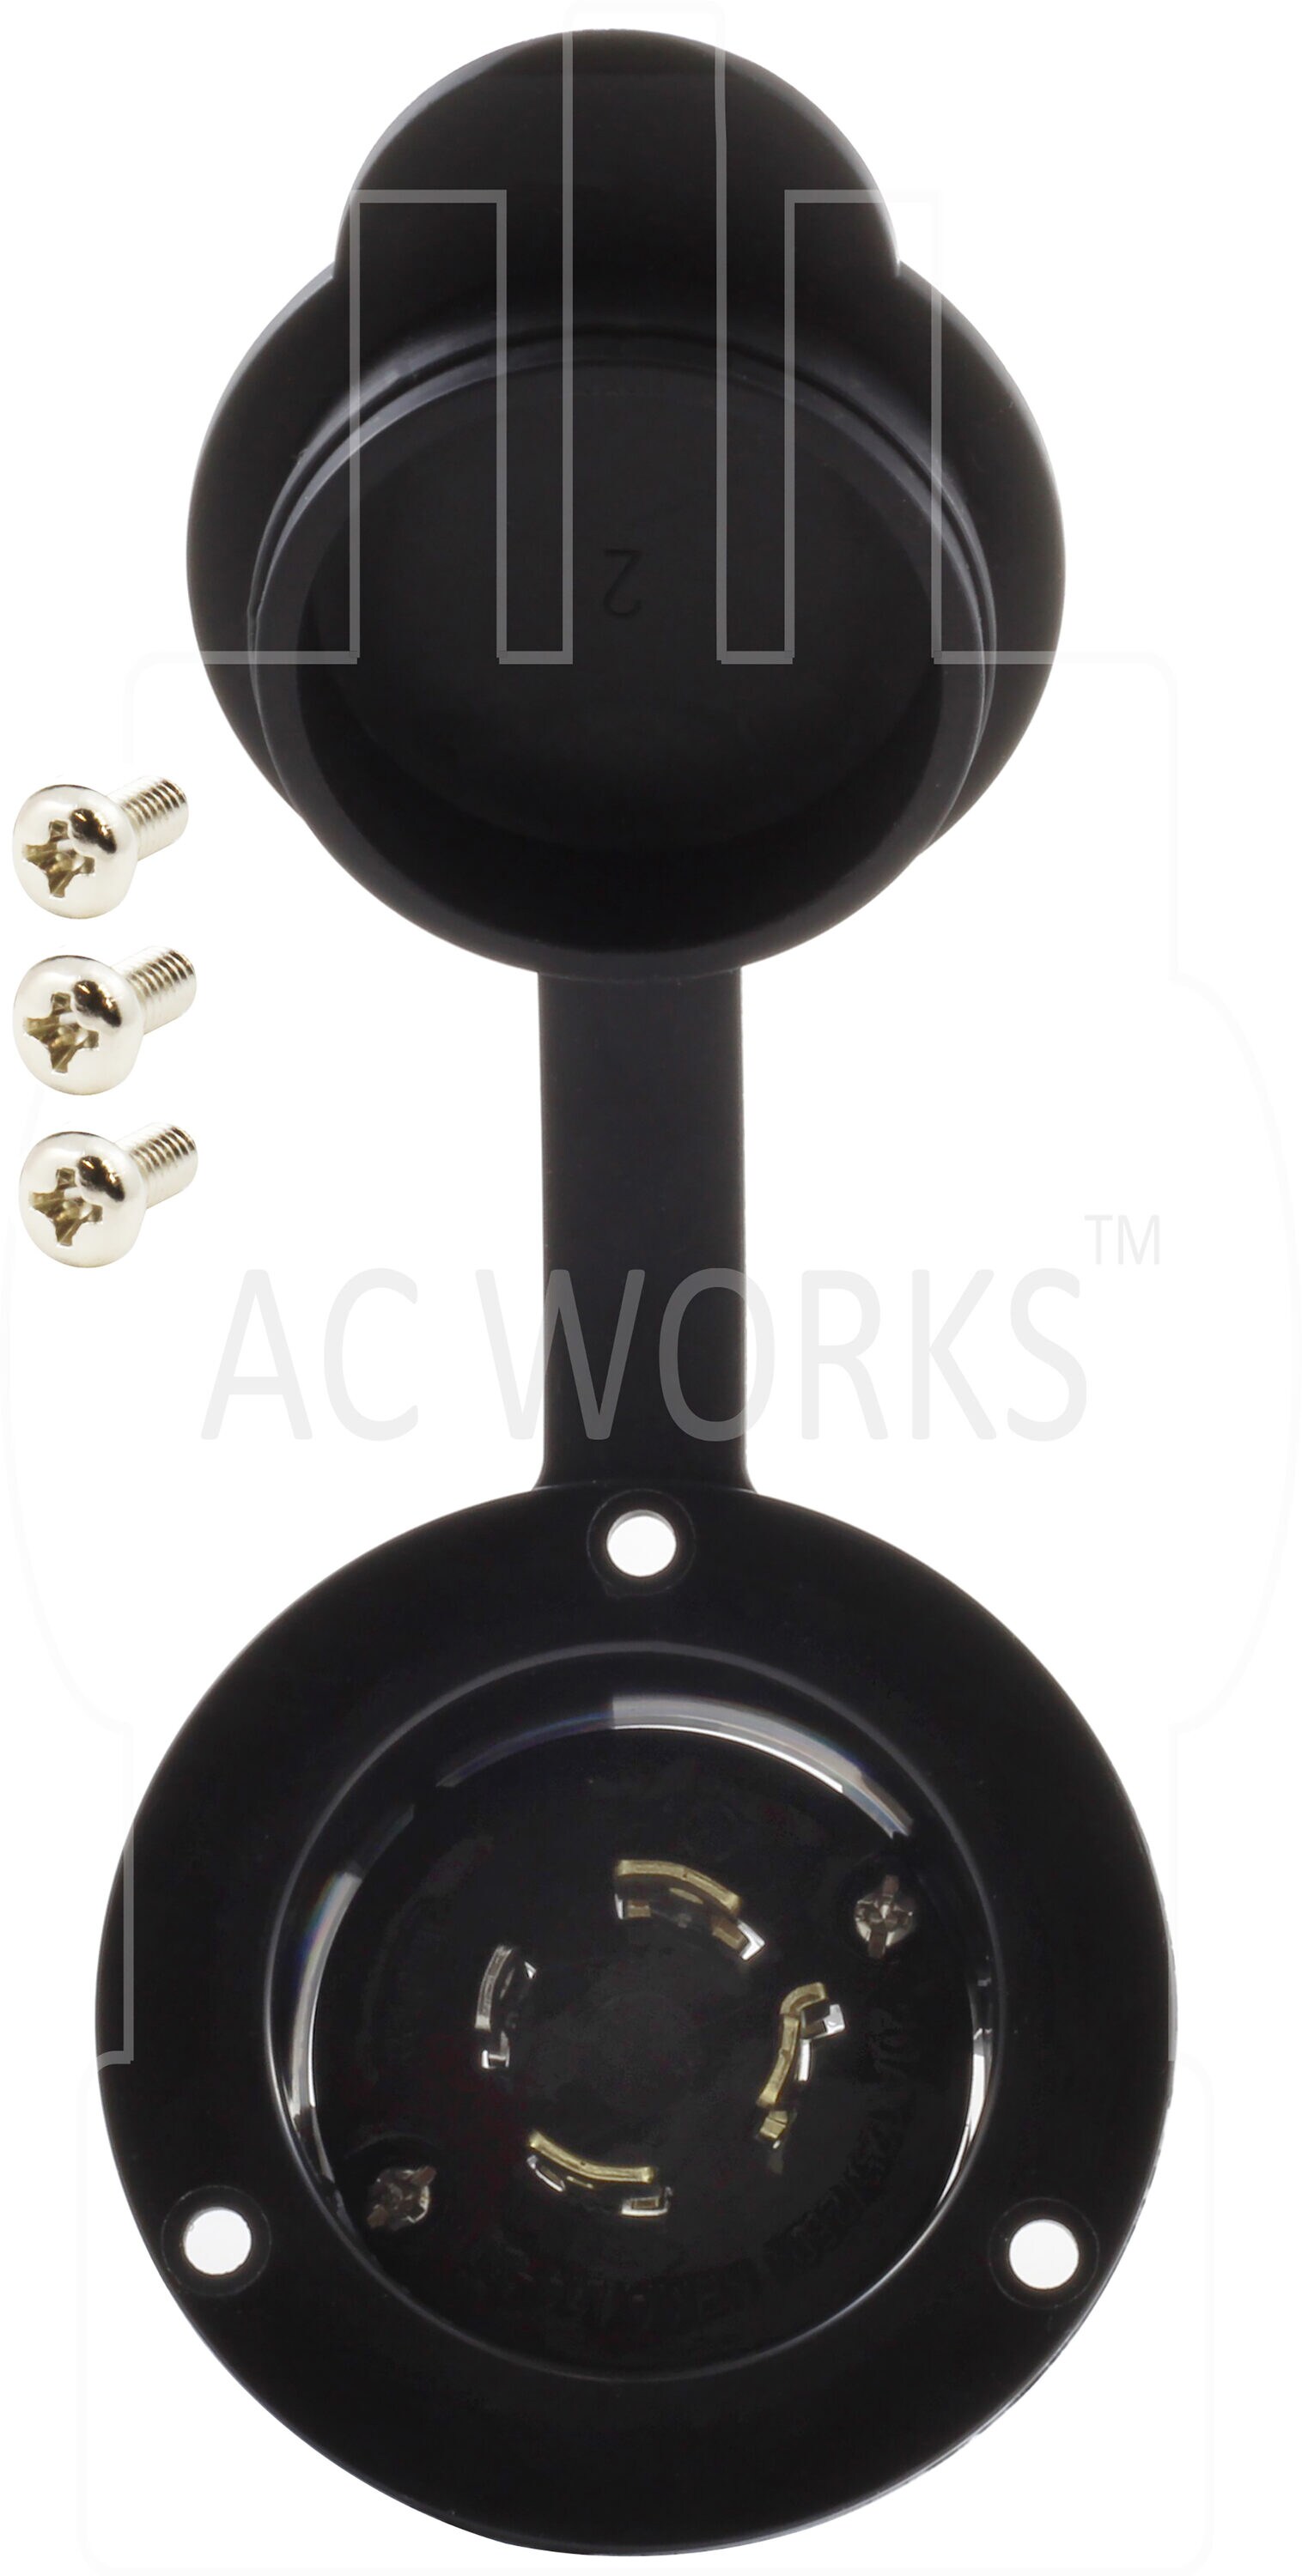 AC WORKS 20-Amp 125/250-Volt NEMA L14-20p 4-wire Grounding Heavy-duty  Locking Plug, Black in the Plugs & Connectors department at